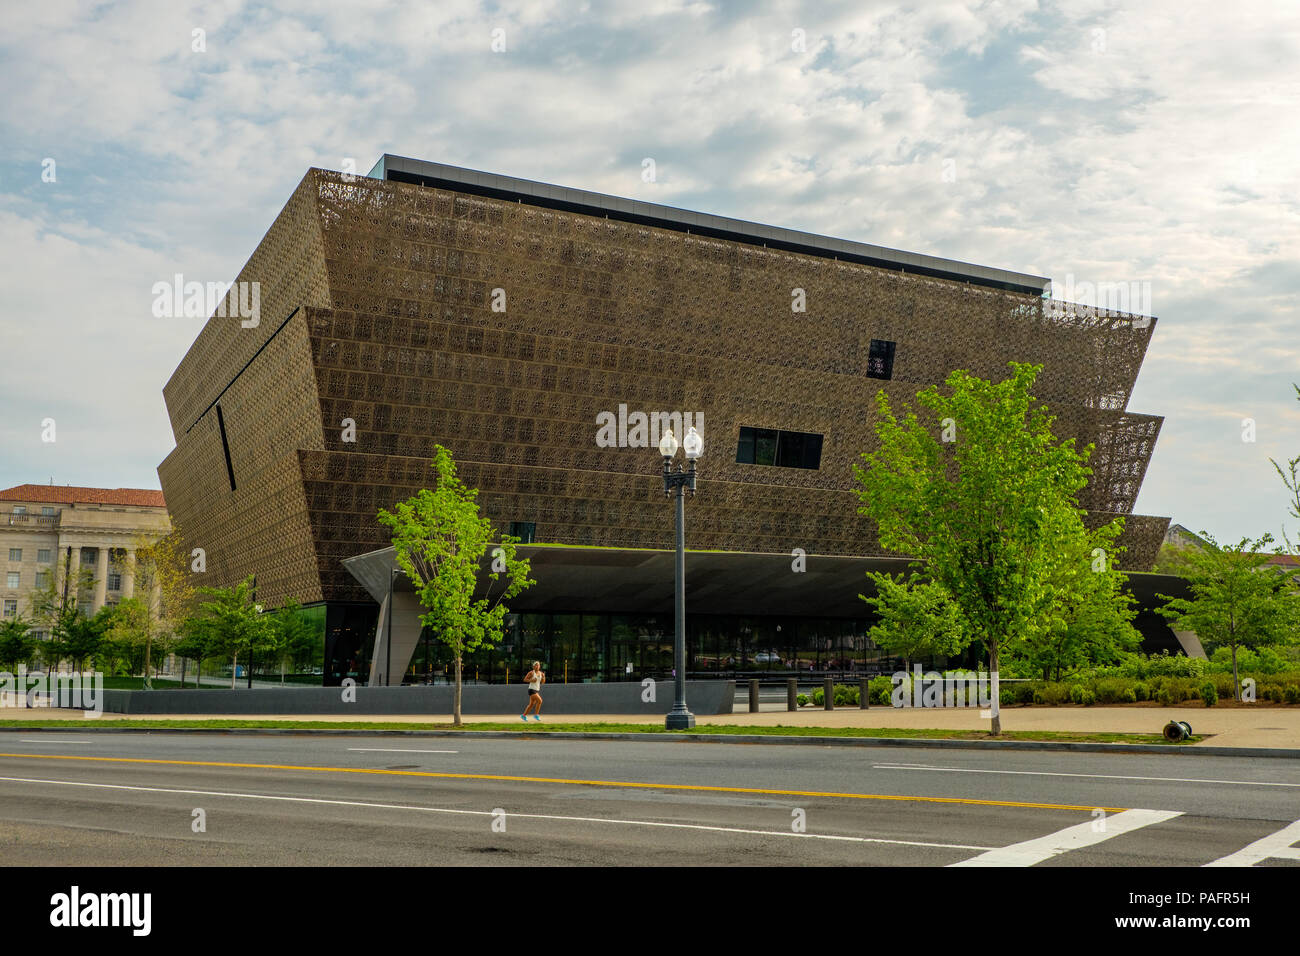 National Museum of African American History and Culture, 1400 Constitution Avenue NW, Washington, DC Banque D'Images